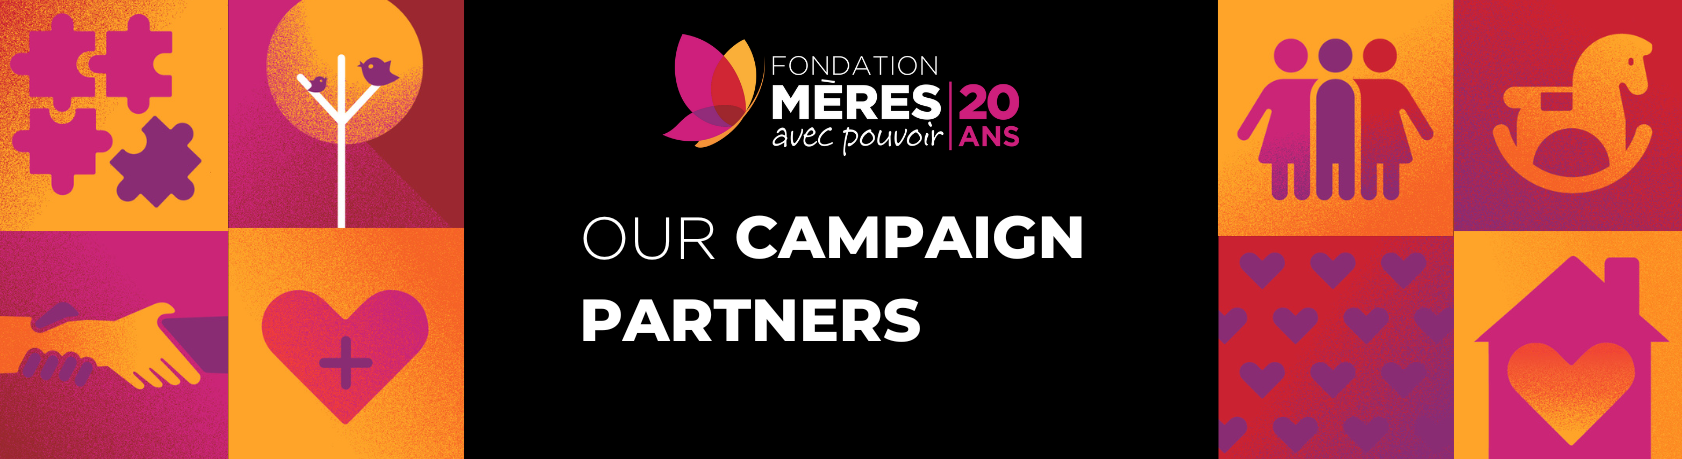 OUR CAMPAIGN PARTNERS